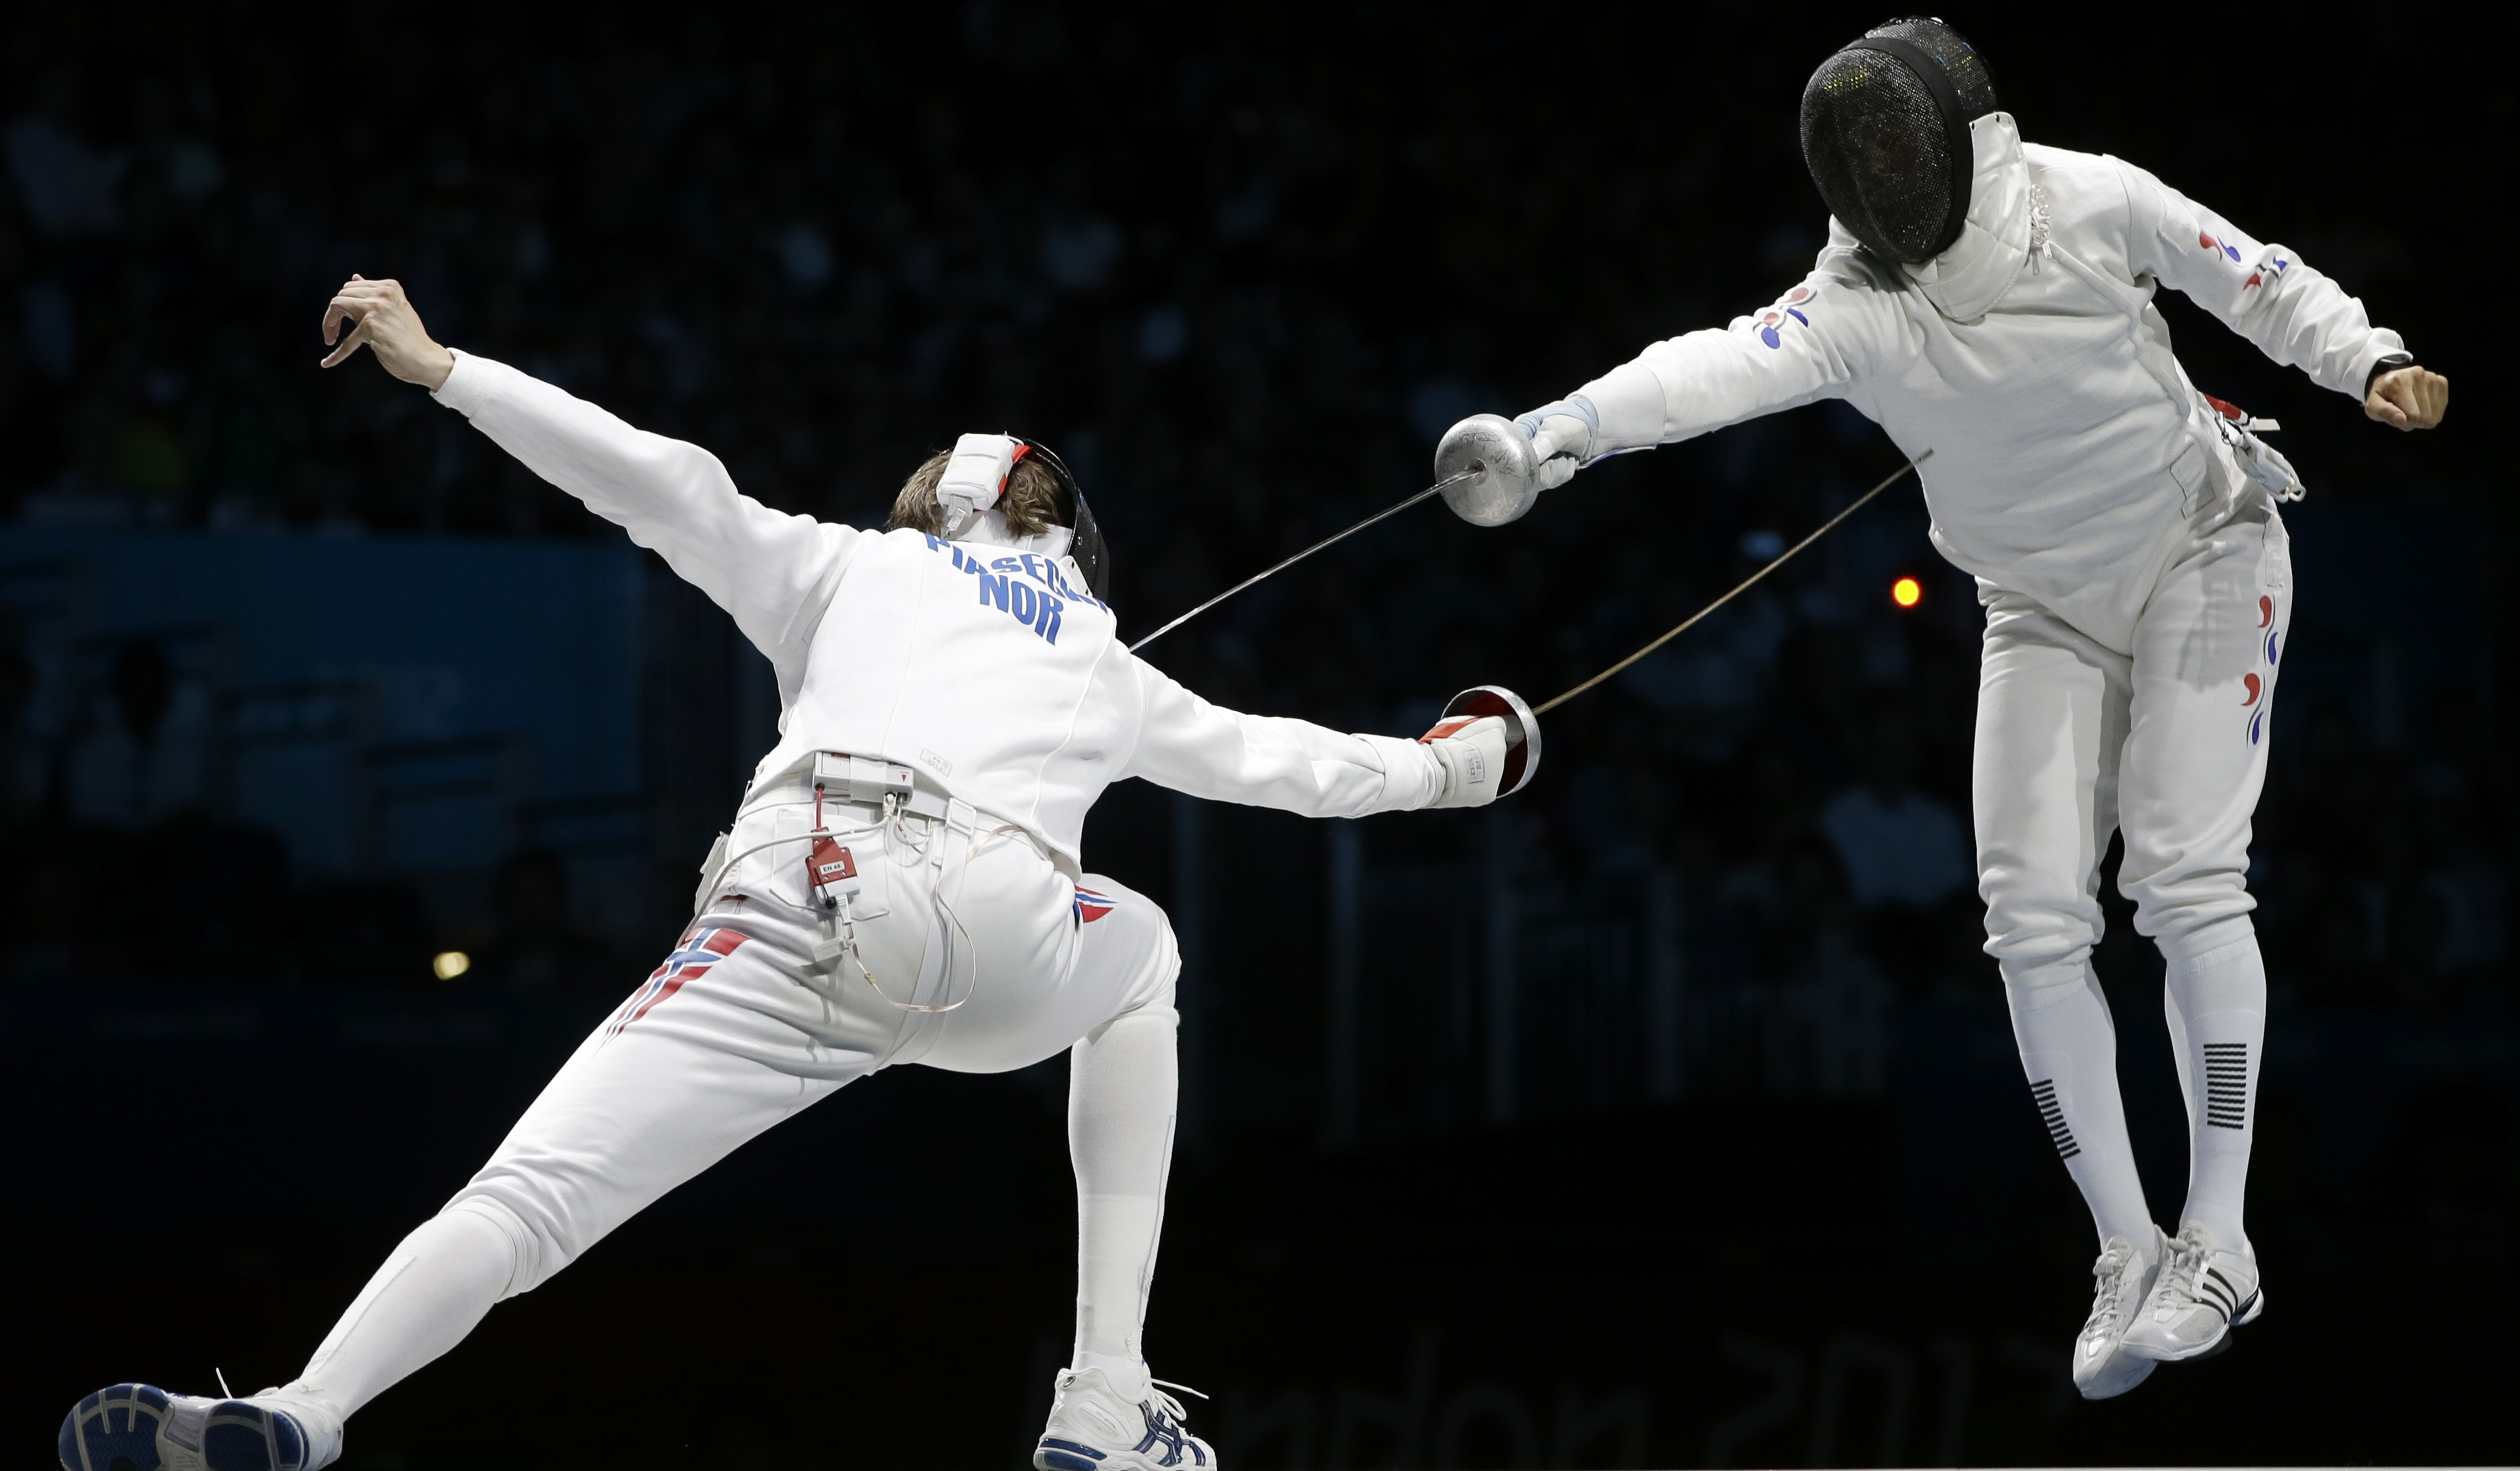 fencing touche